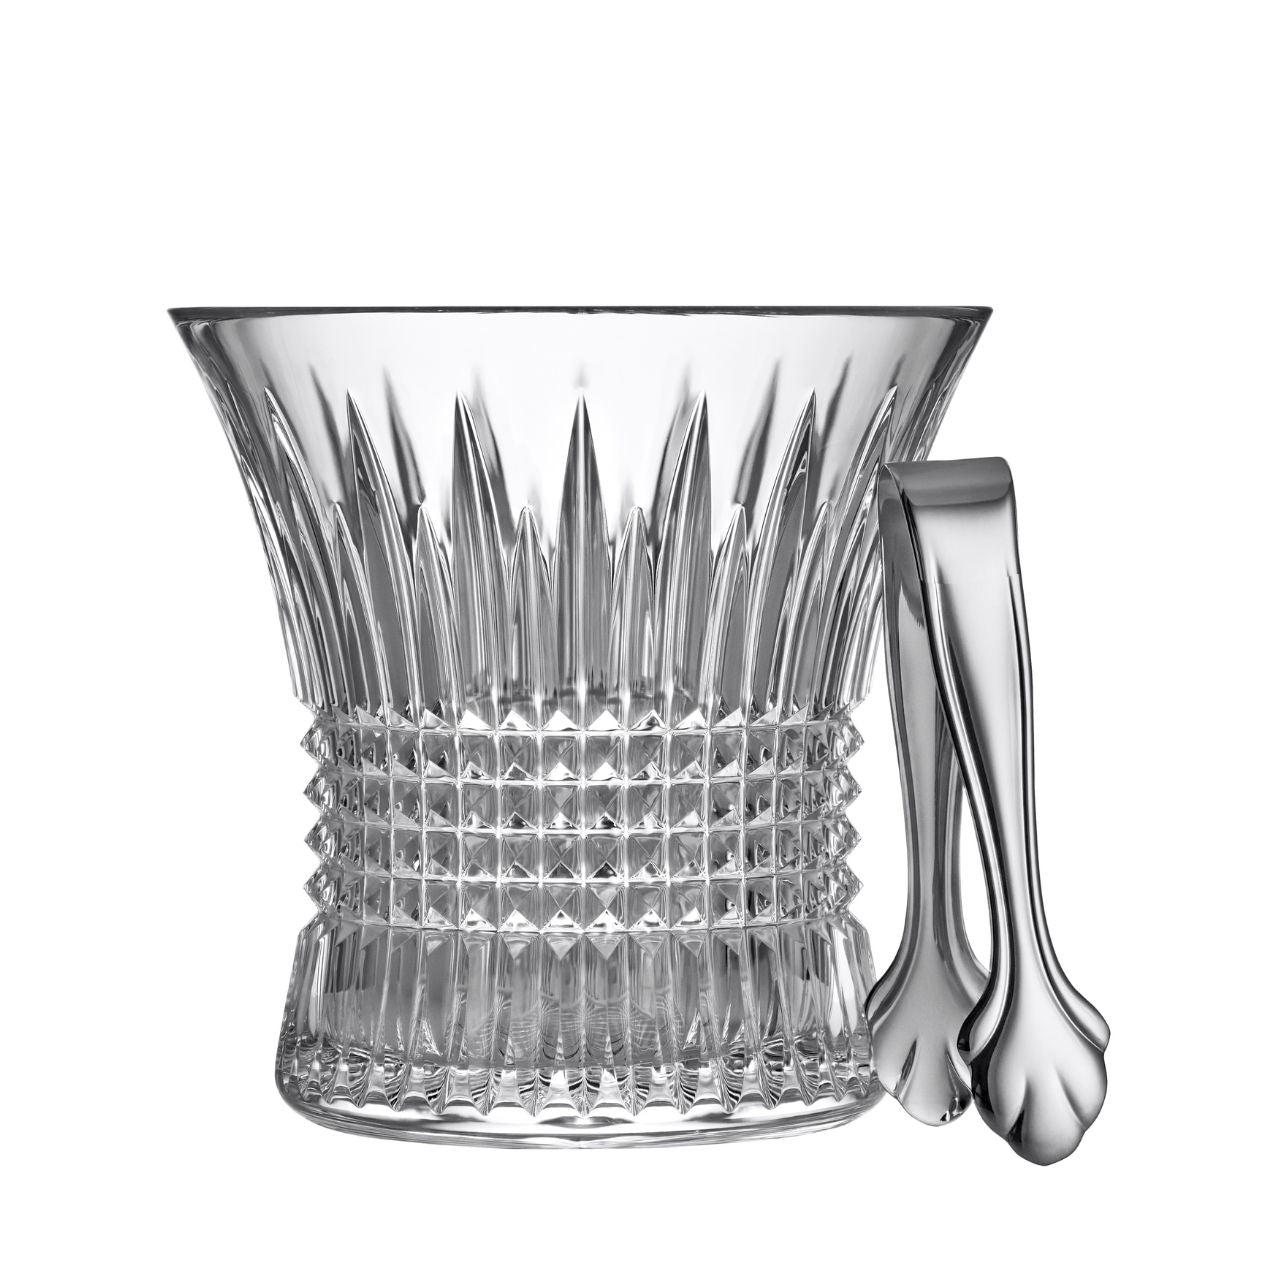 Waterford Crystal Lismore Diamond Ice Bucket With Tongs  The Lismore Diamond pattern is a strikingly modern reinvention of the Waterford classic, characterized by intricate diamond cuts rendered in radiant fine crystal.